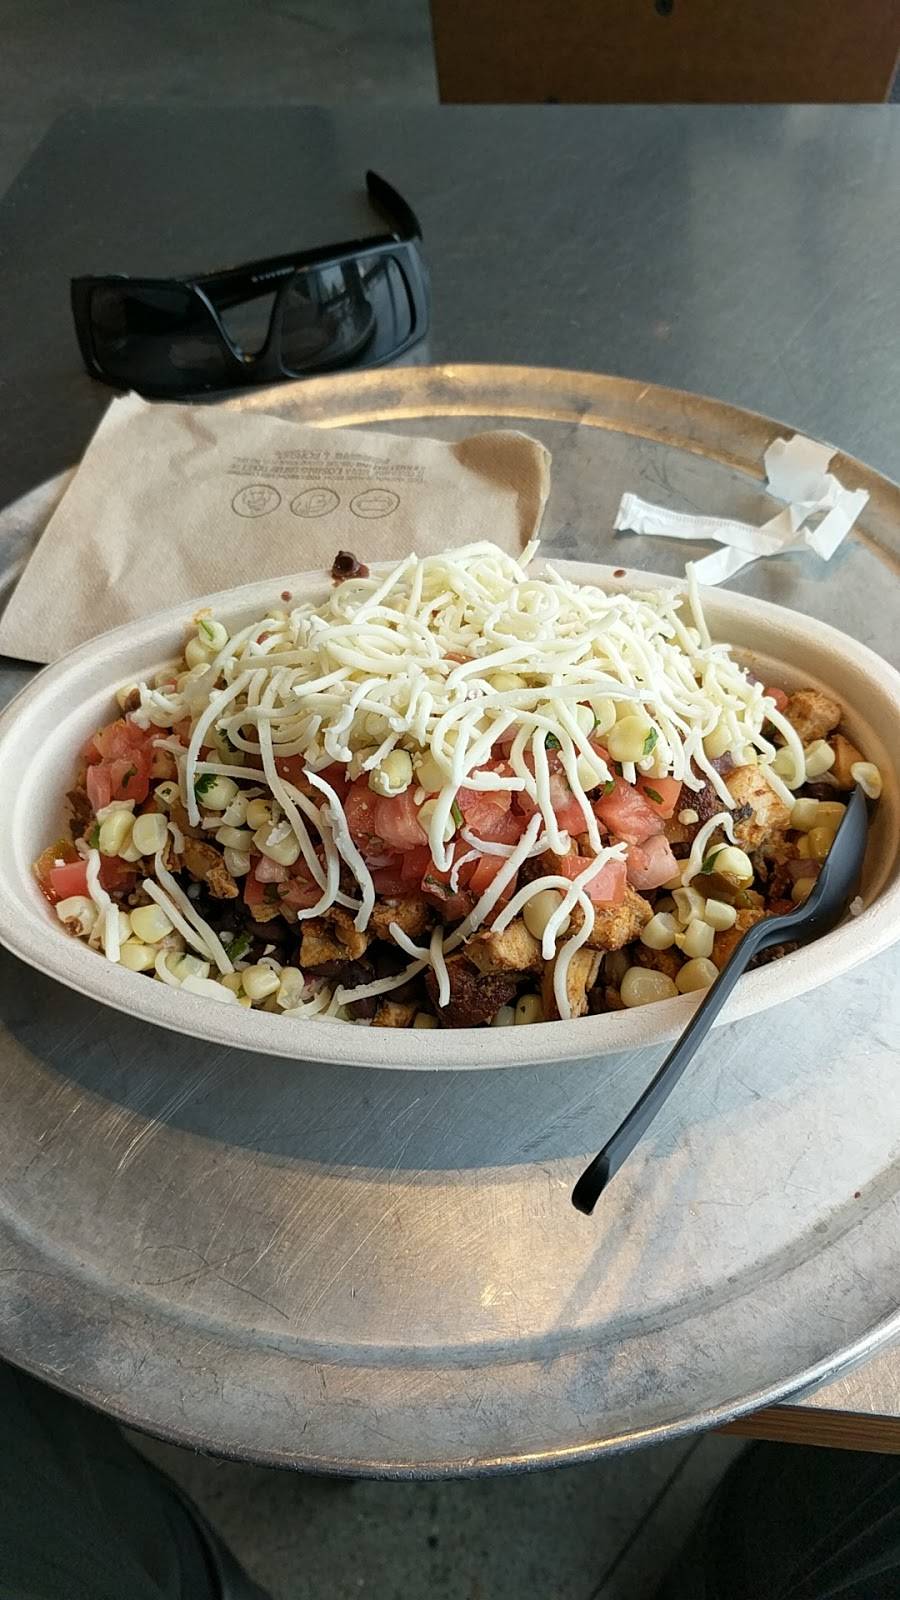 Chipotle Mexican Grill | restaurant | 40 NJ-17, East Rutherford, NJ 07073, USA | 2015495302 OR +1 201-549-5302